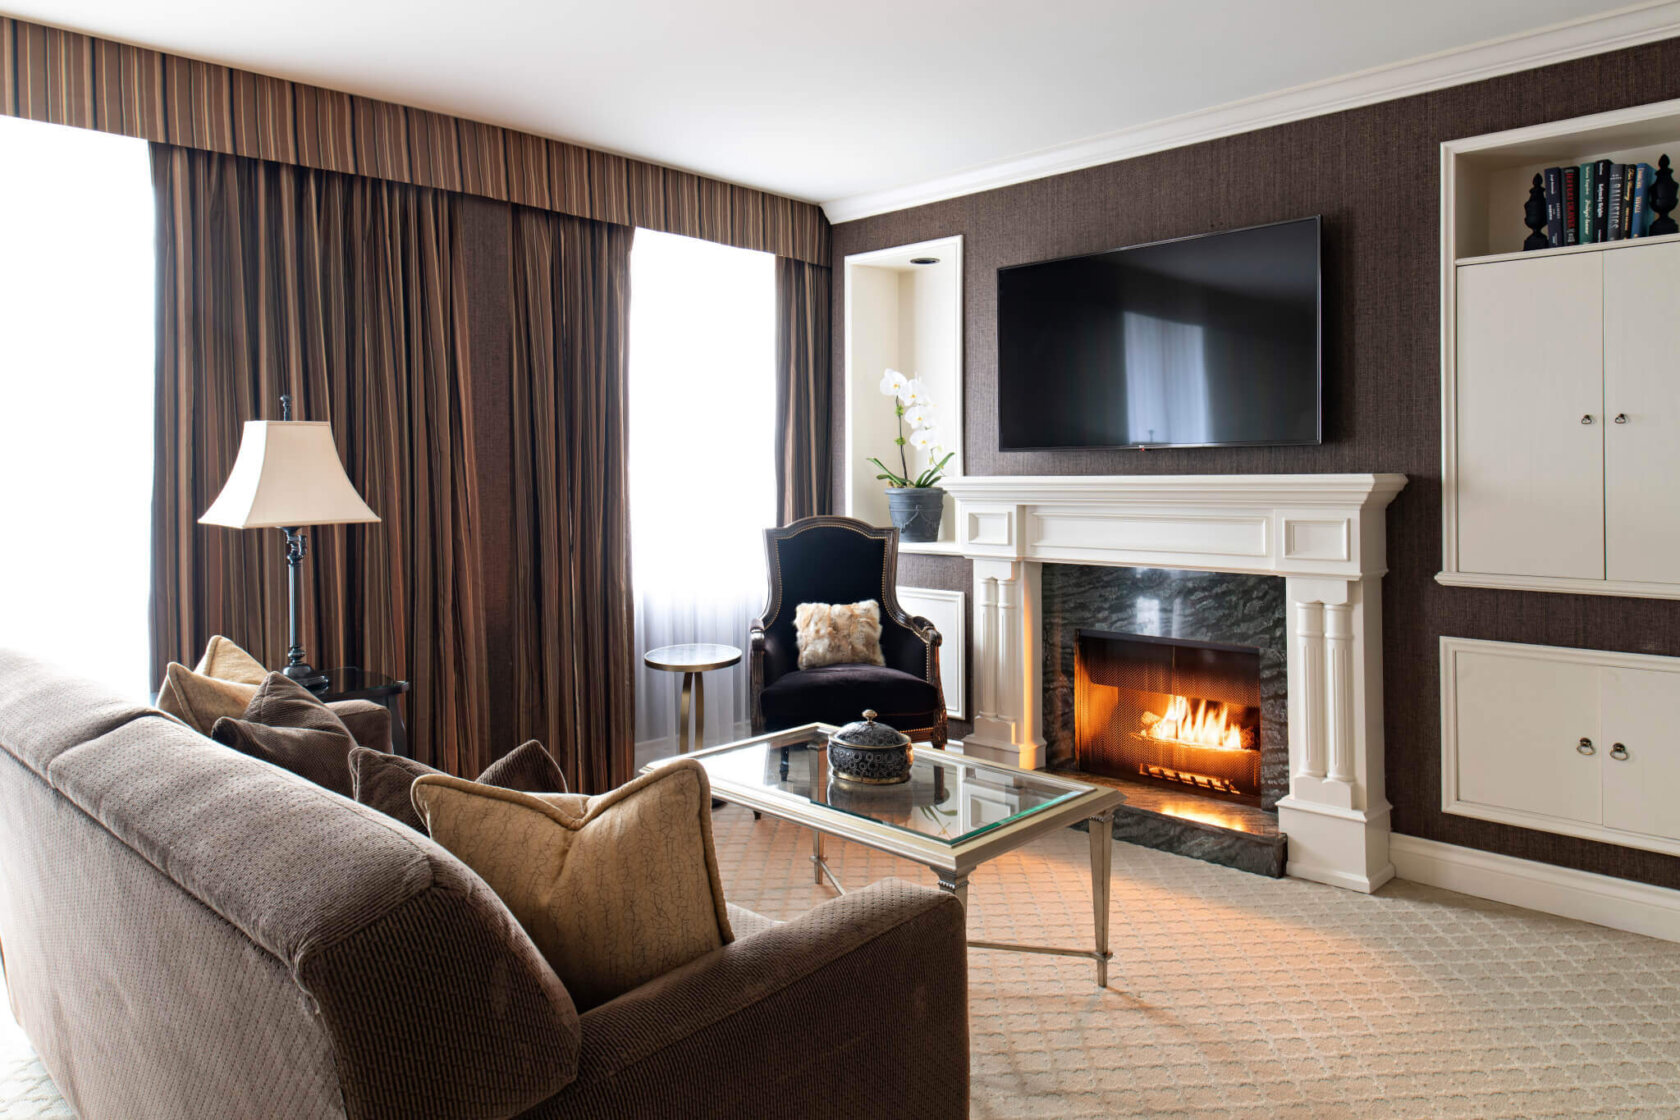 Penthouse Living room with fireplace, featuring British-Inspired Urban Décor with Accents of Silk, Leather, and Natural Grasscloth